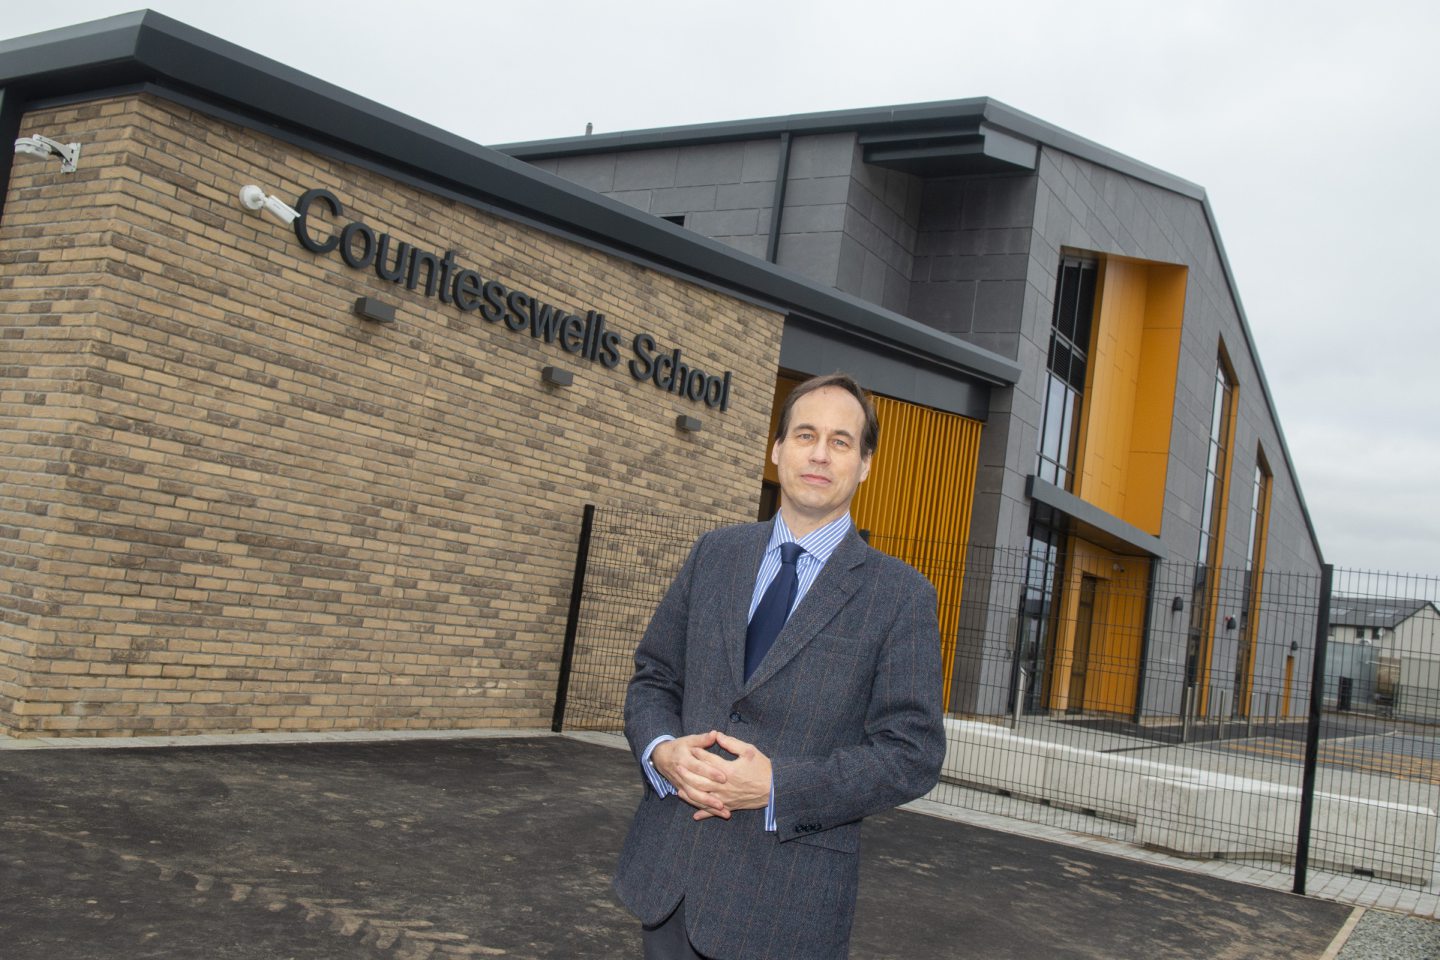 Council education convener Martin Greig addressed the concerns about the school roll and the looming difficulties in fitting children from the same family in the same schools. Image: Norman Adams/Aberdeen City Council.